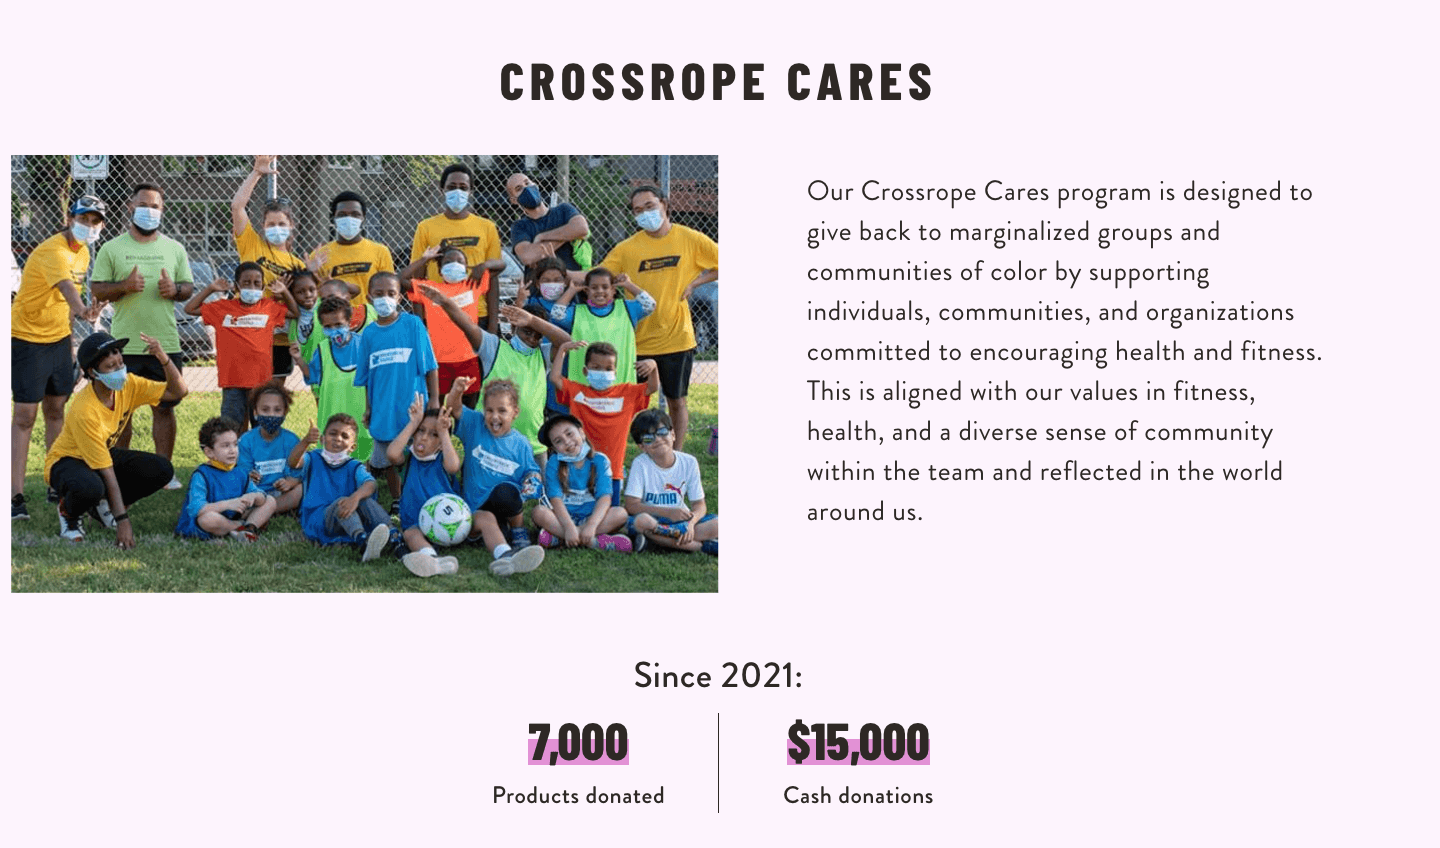 From Crossrope's About Us page, a picture of their Crossrope Cares program where a collection of Crossrope employees are standing with a bunch of kids outside smiling and celebrating